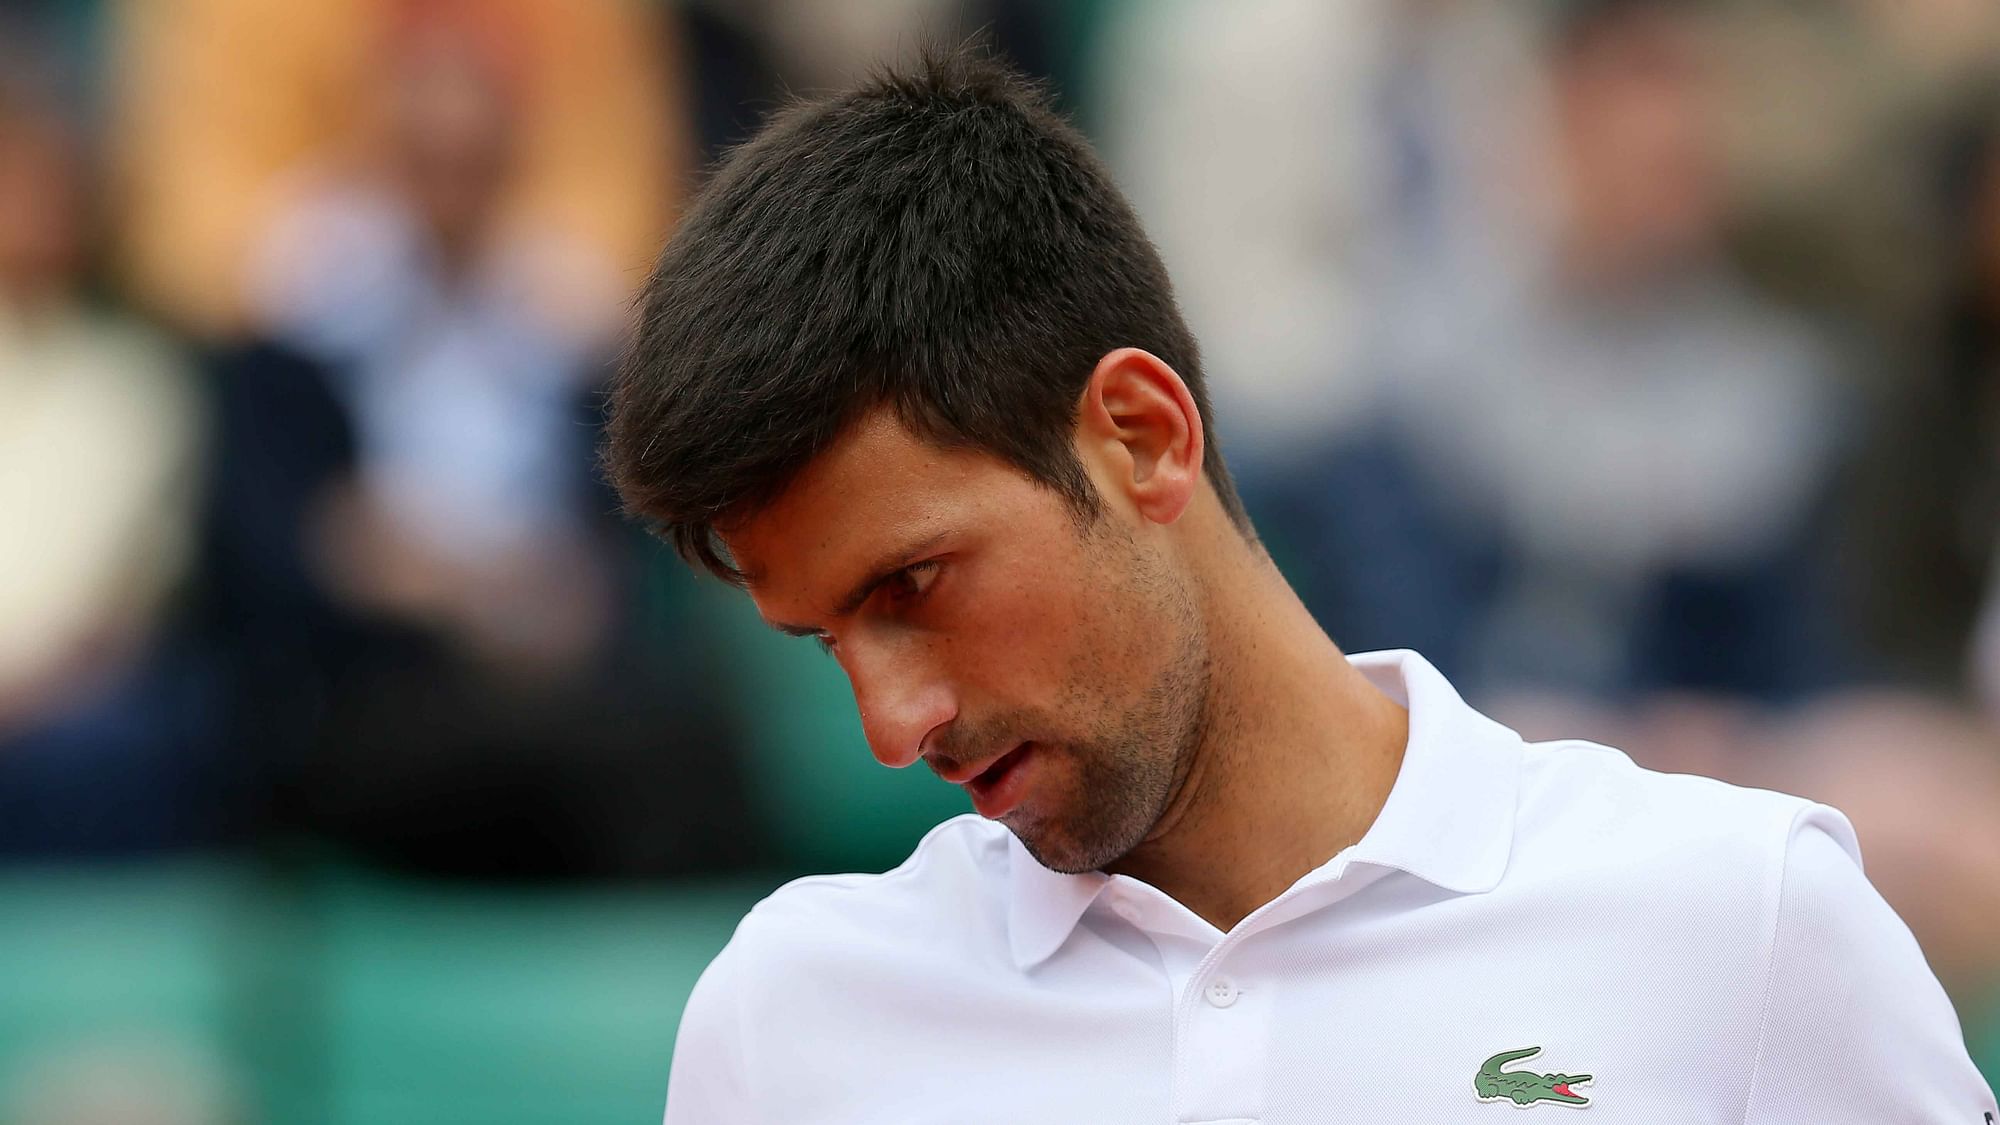 Novak Djokovic was knocked out of the French Open. (Photo: AP)